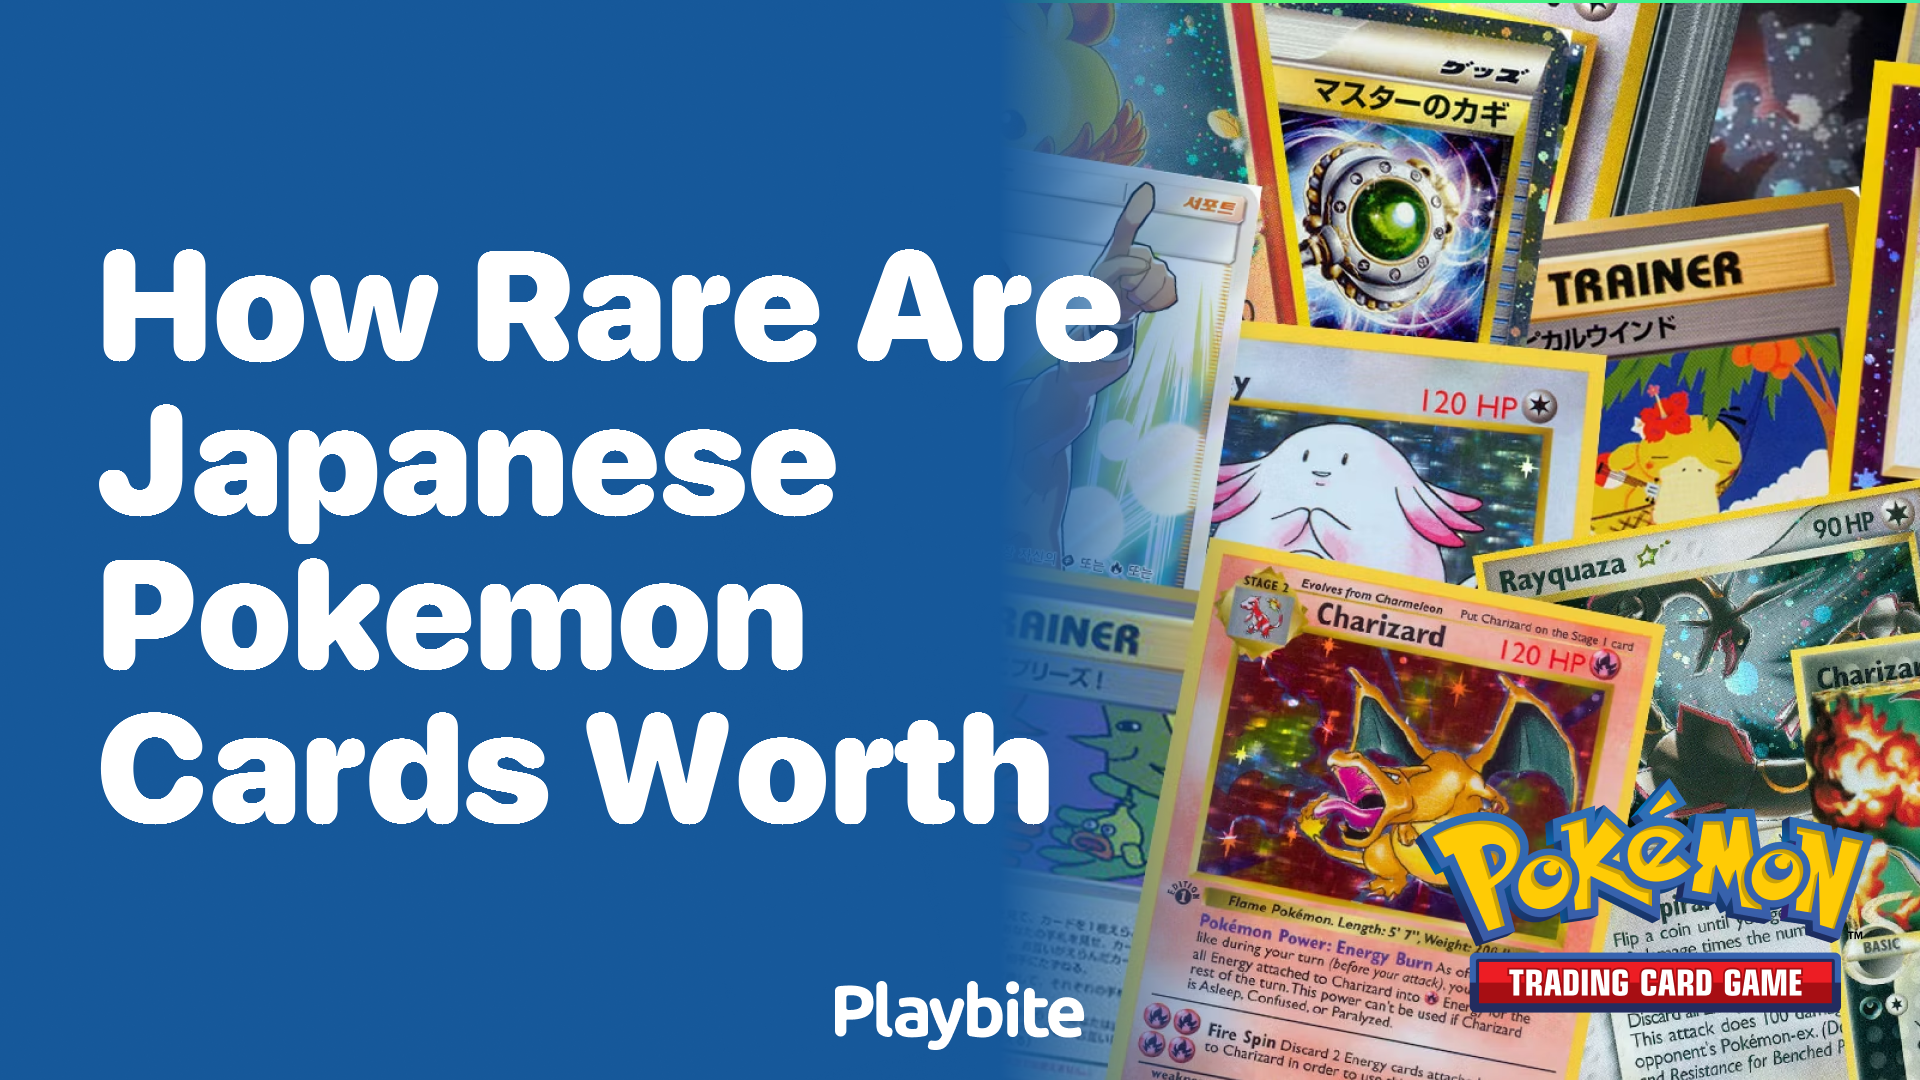 How rare are Japanese Pokemon cards worth?